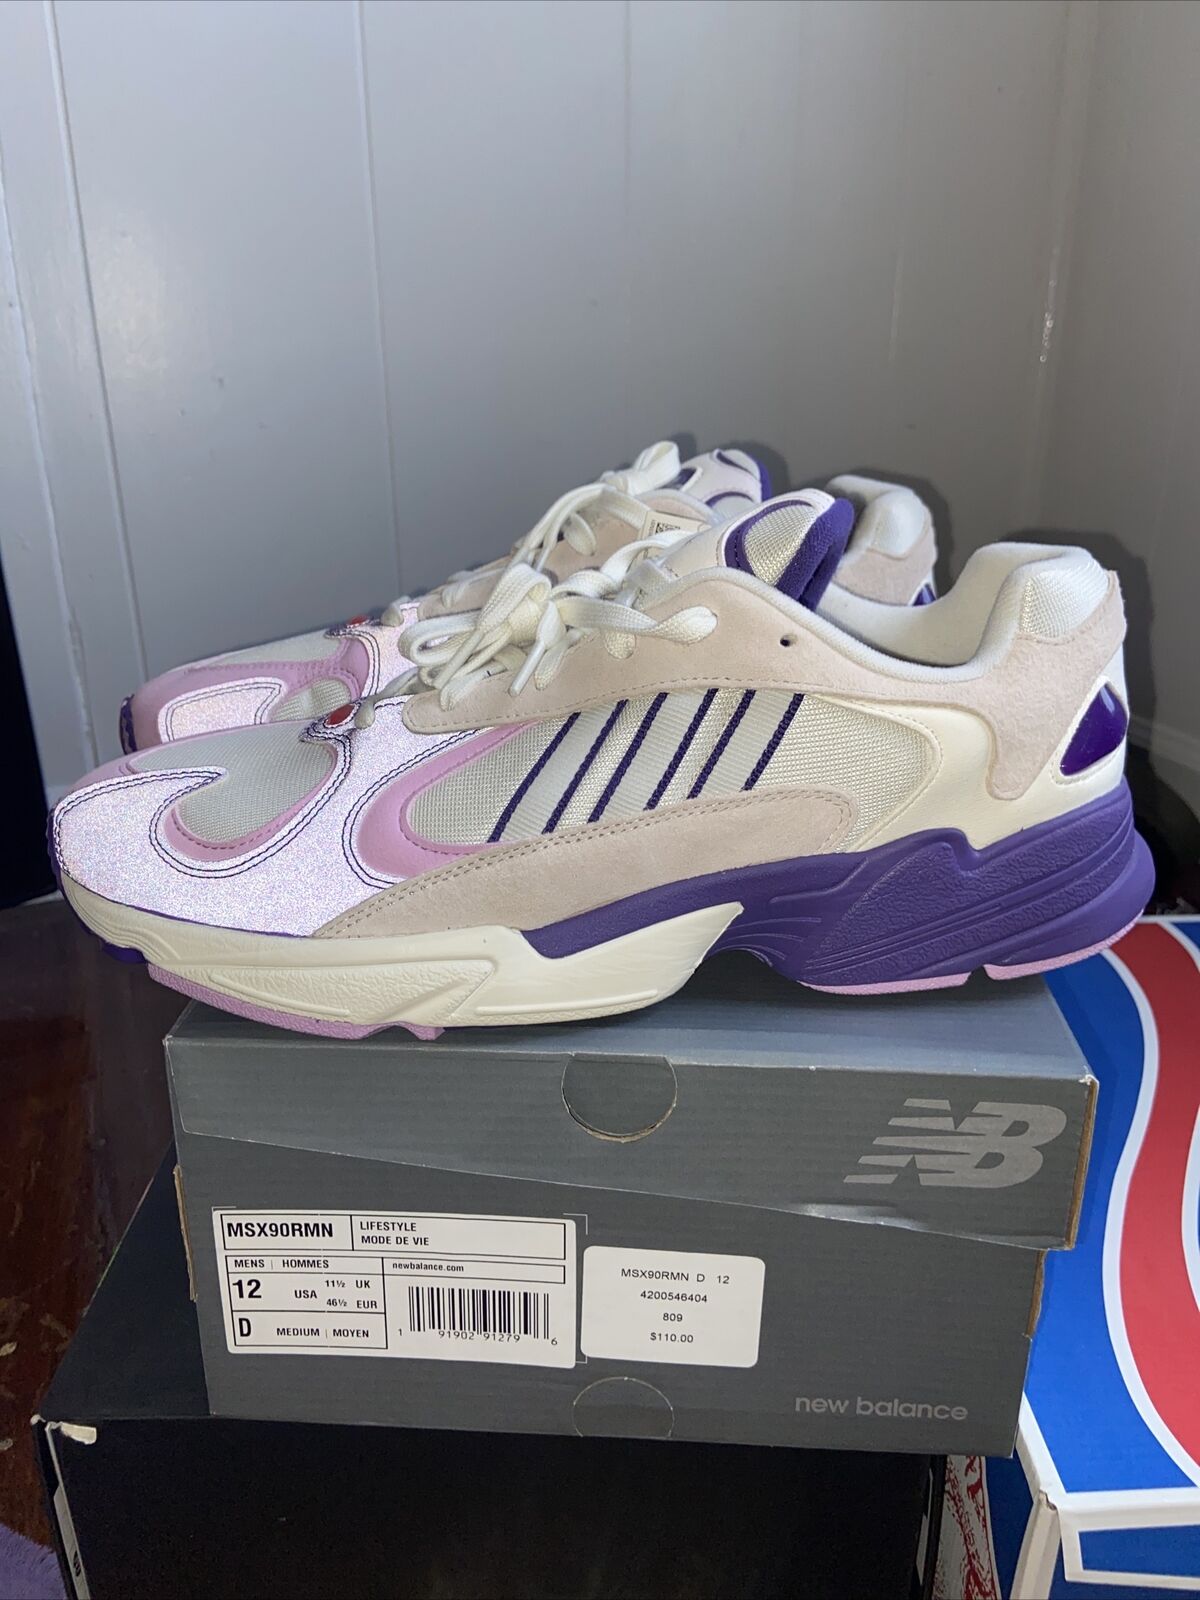 Adidas Yung-1 Dragon Ball Z Frieza Limited Edition Shoes Size 12 New